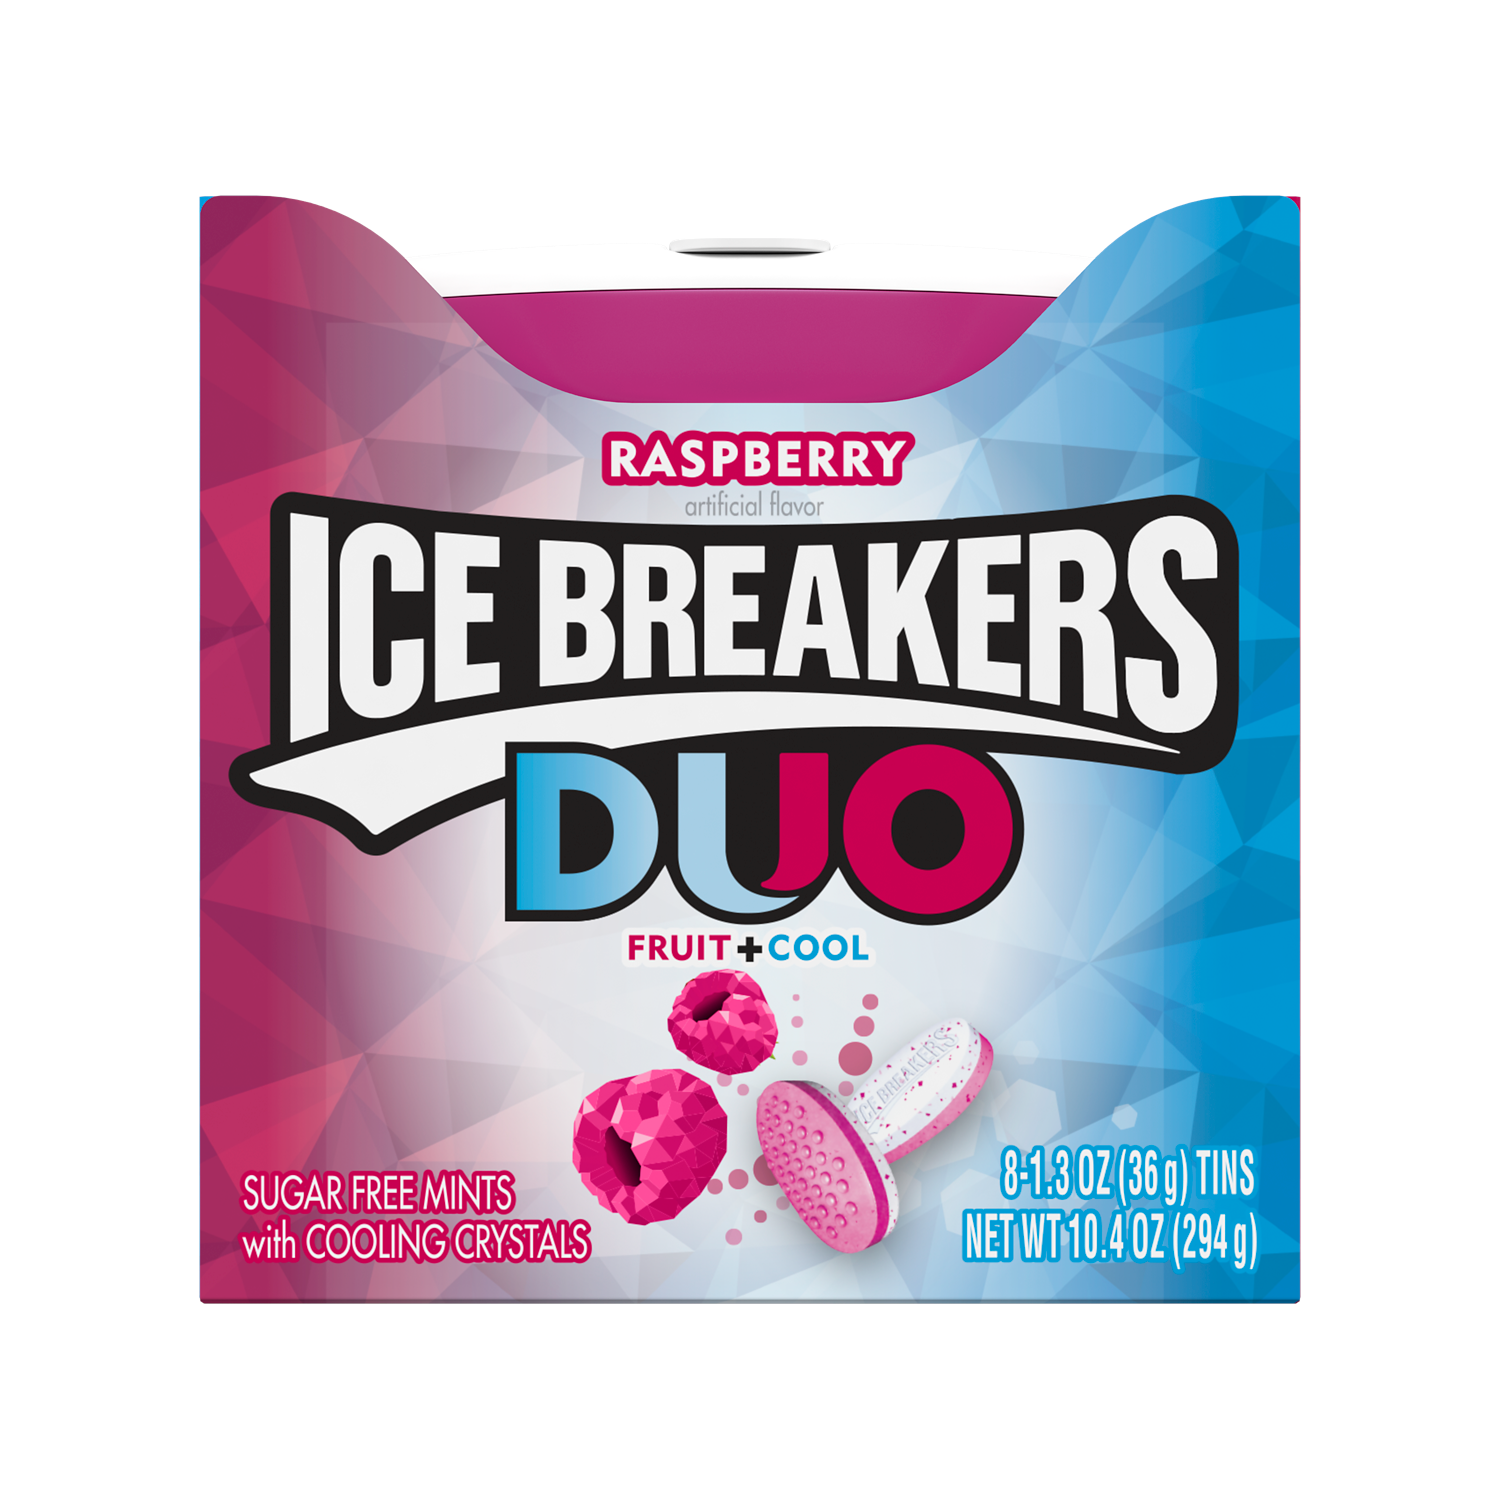 ICE BREAKERS DUO Raspberry Sugar Free Mints, 1.3 oz box, 8 count - Front of Package